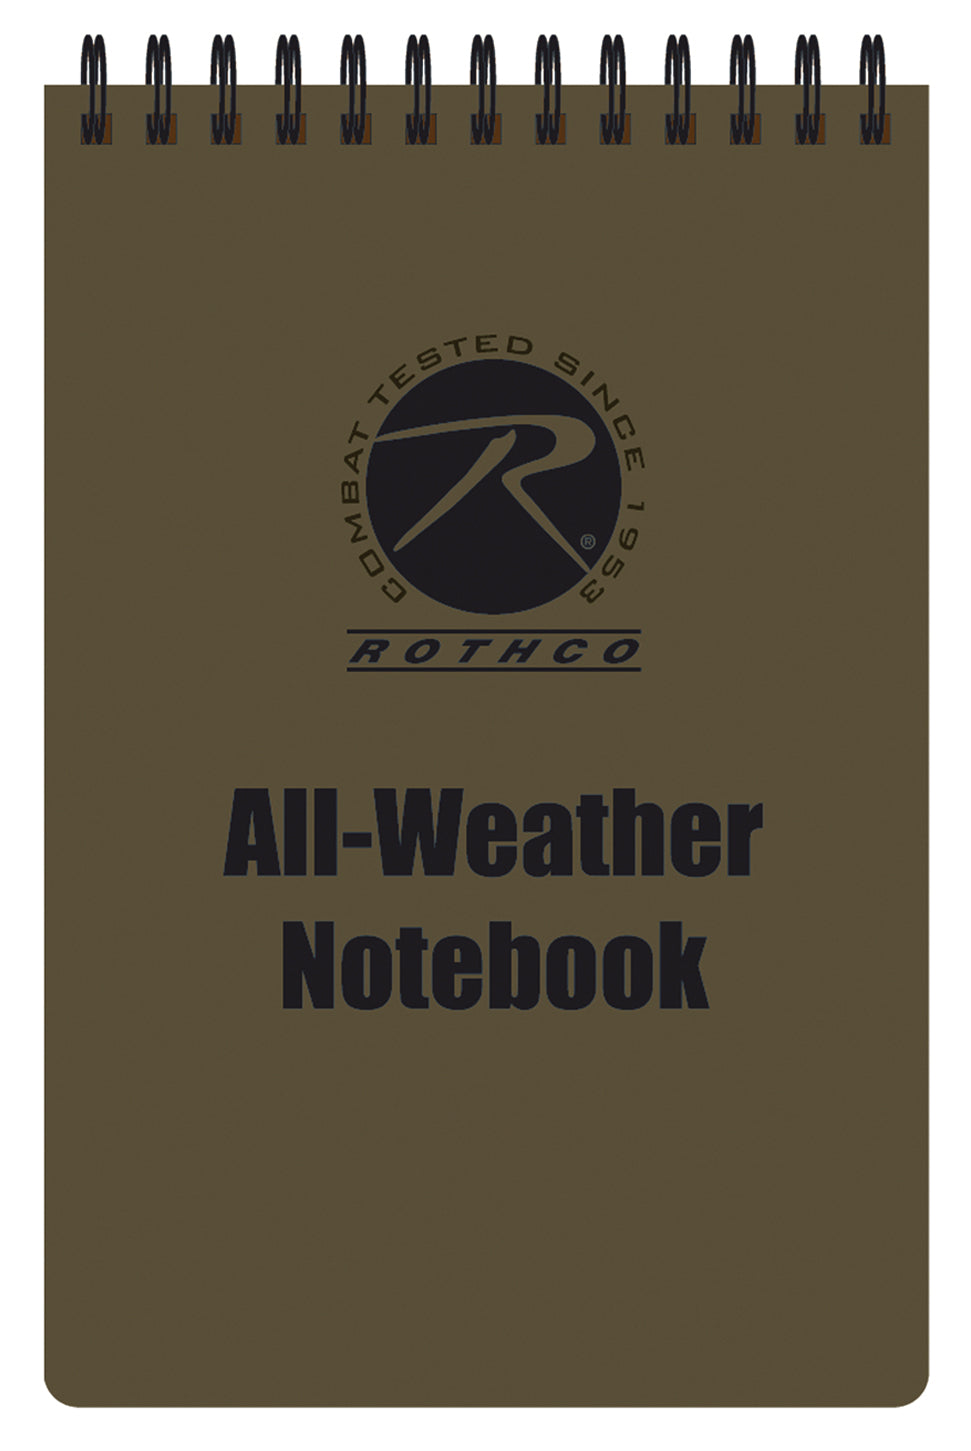 Milspec All-Weather Waterproof Notebook Bug Out Bag Collection MilTac Tactical Military Outdoor Gear Australia